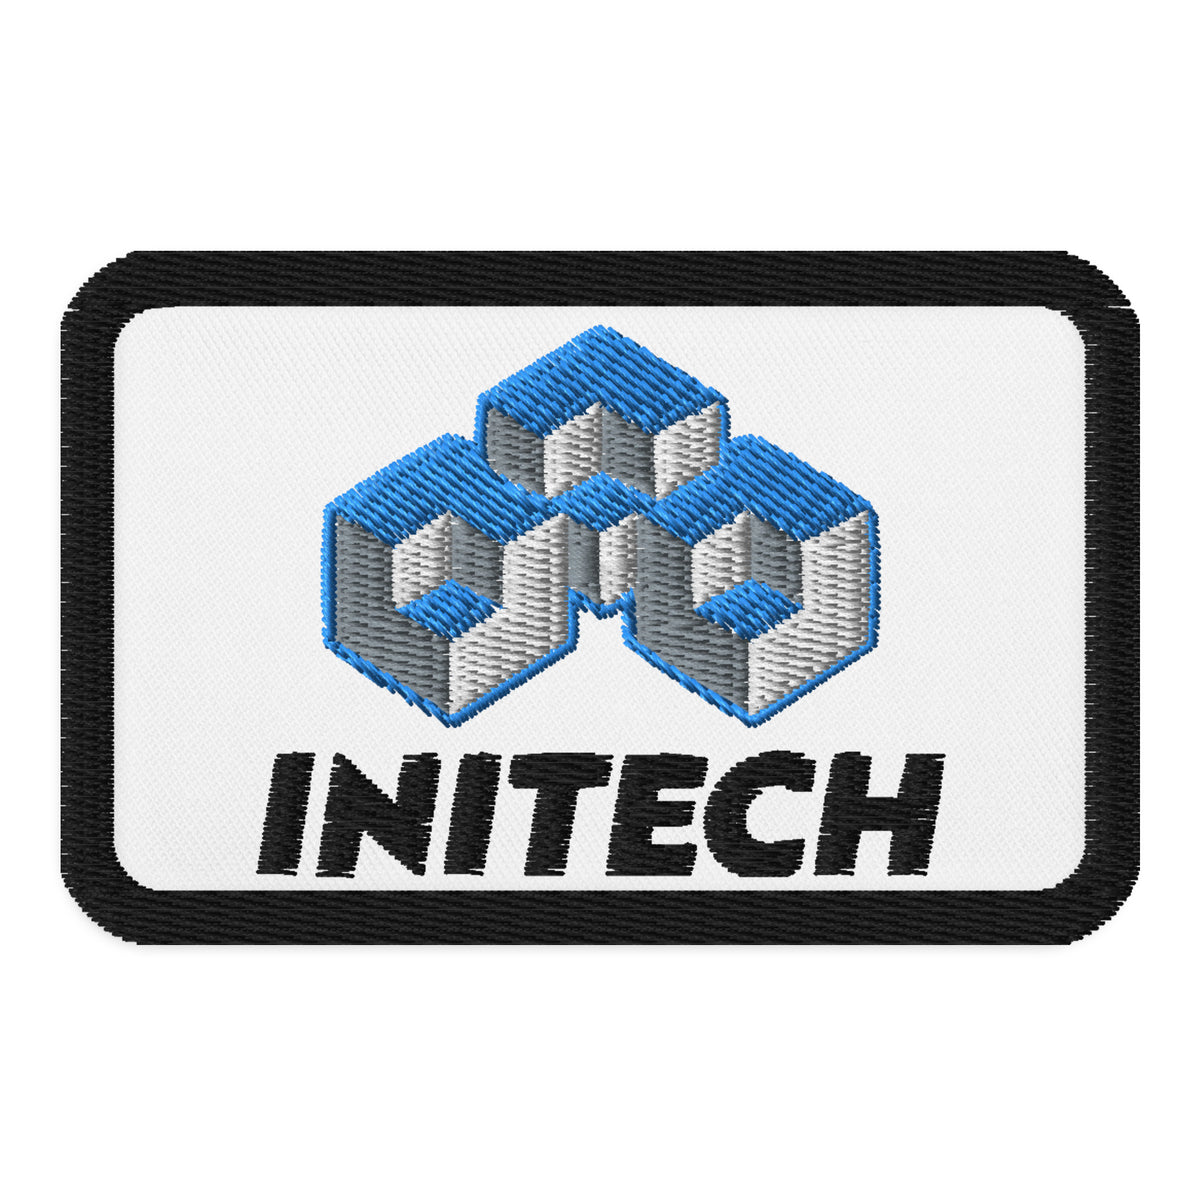 INITECH Embroidered Patch